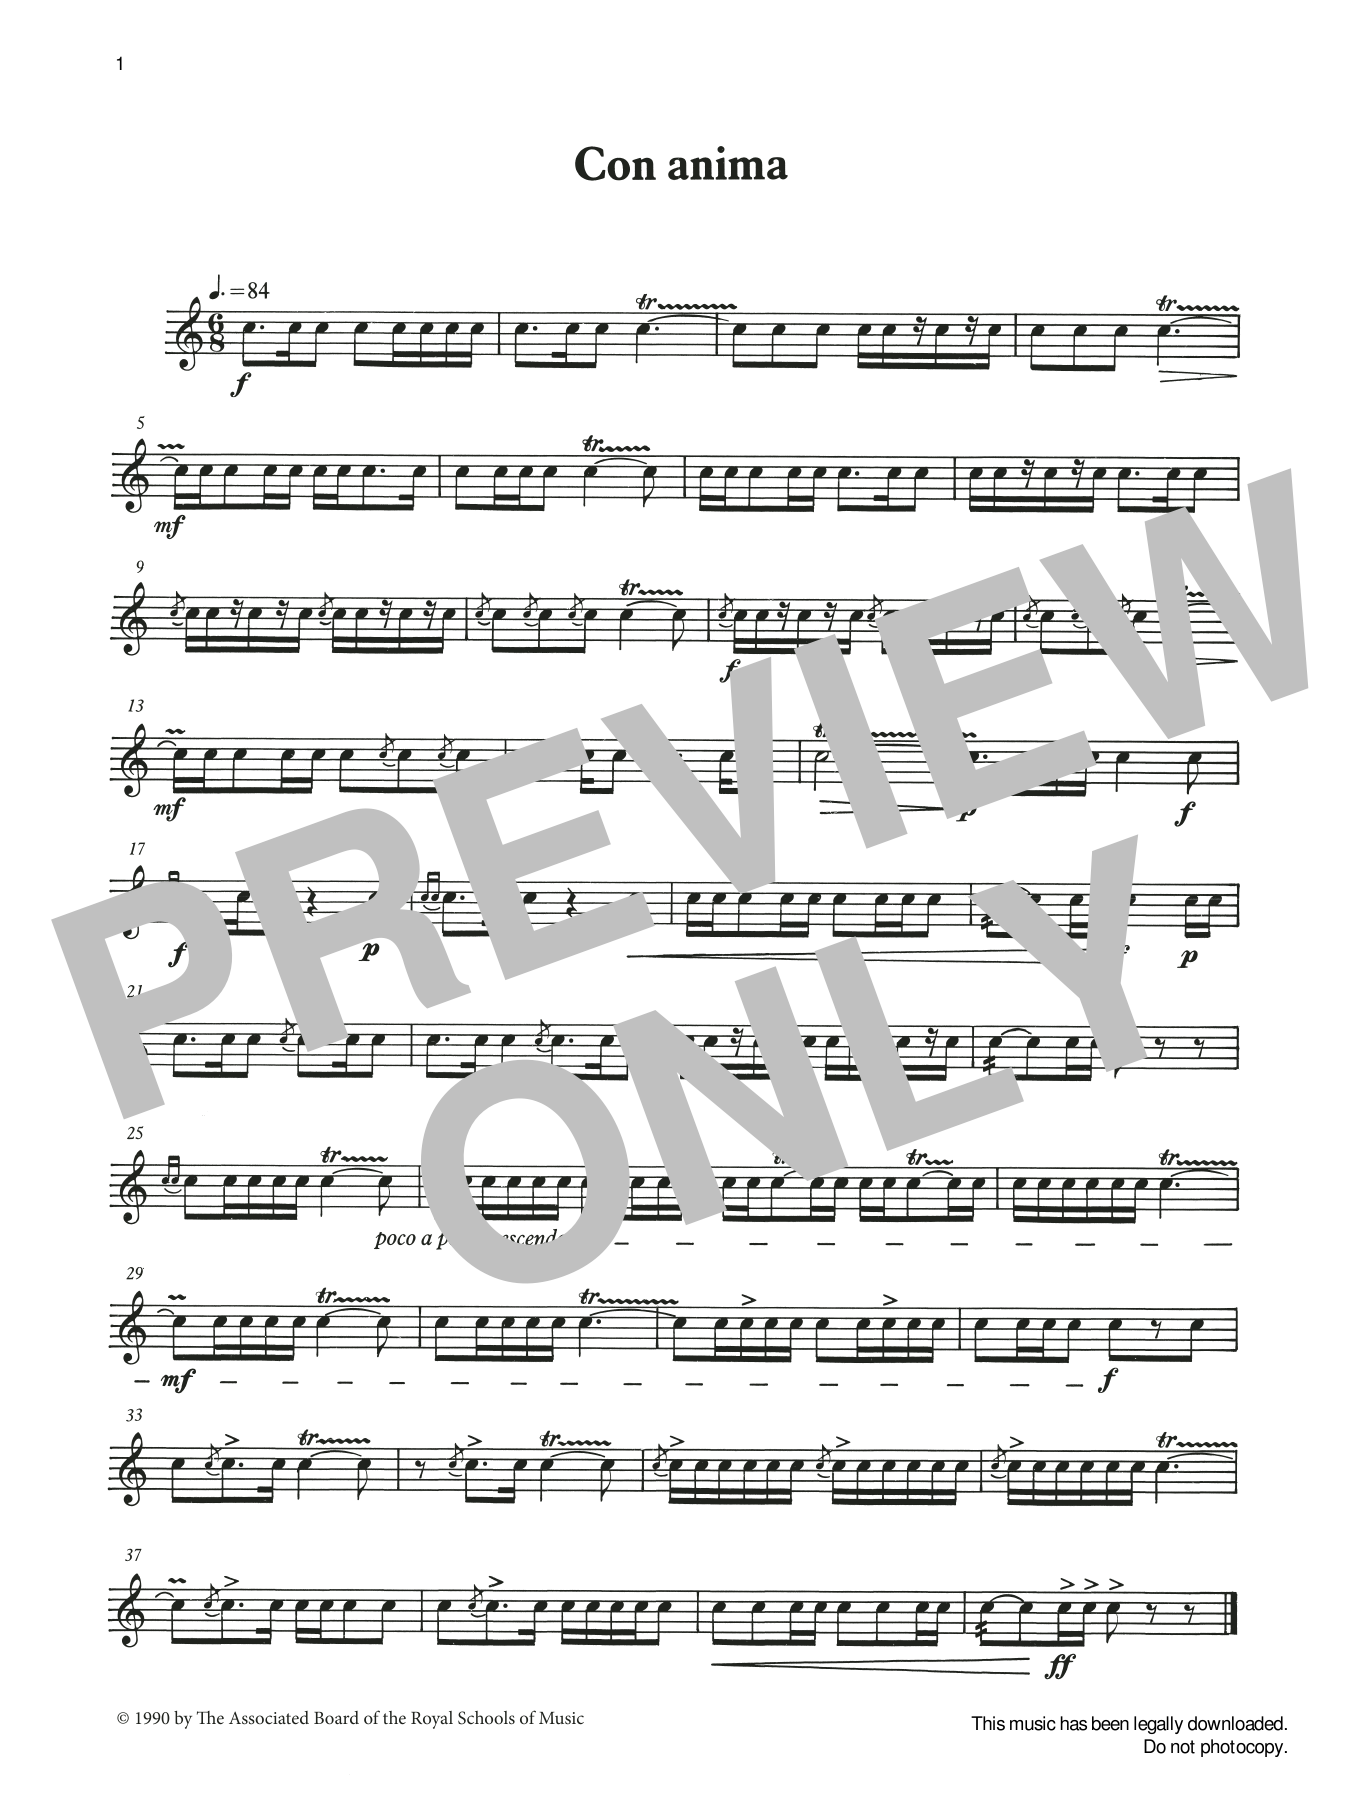 Con anima from Graded Music for Snare Drum, Book III (Percussion Solo) von Ian Wright and Kevin Hathaway